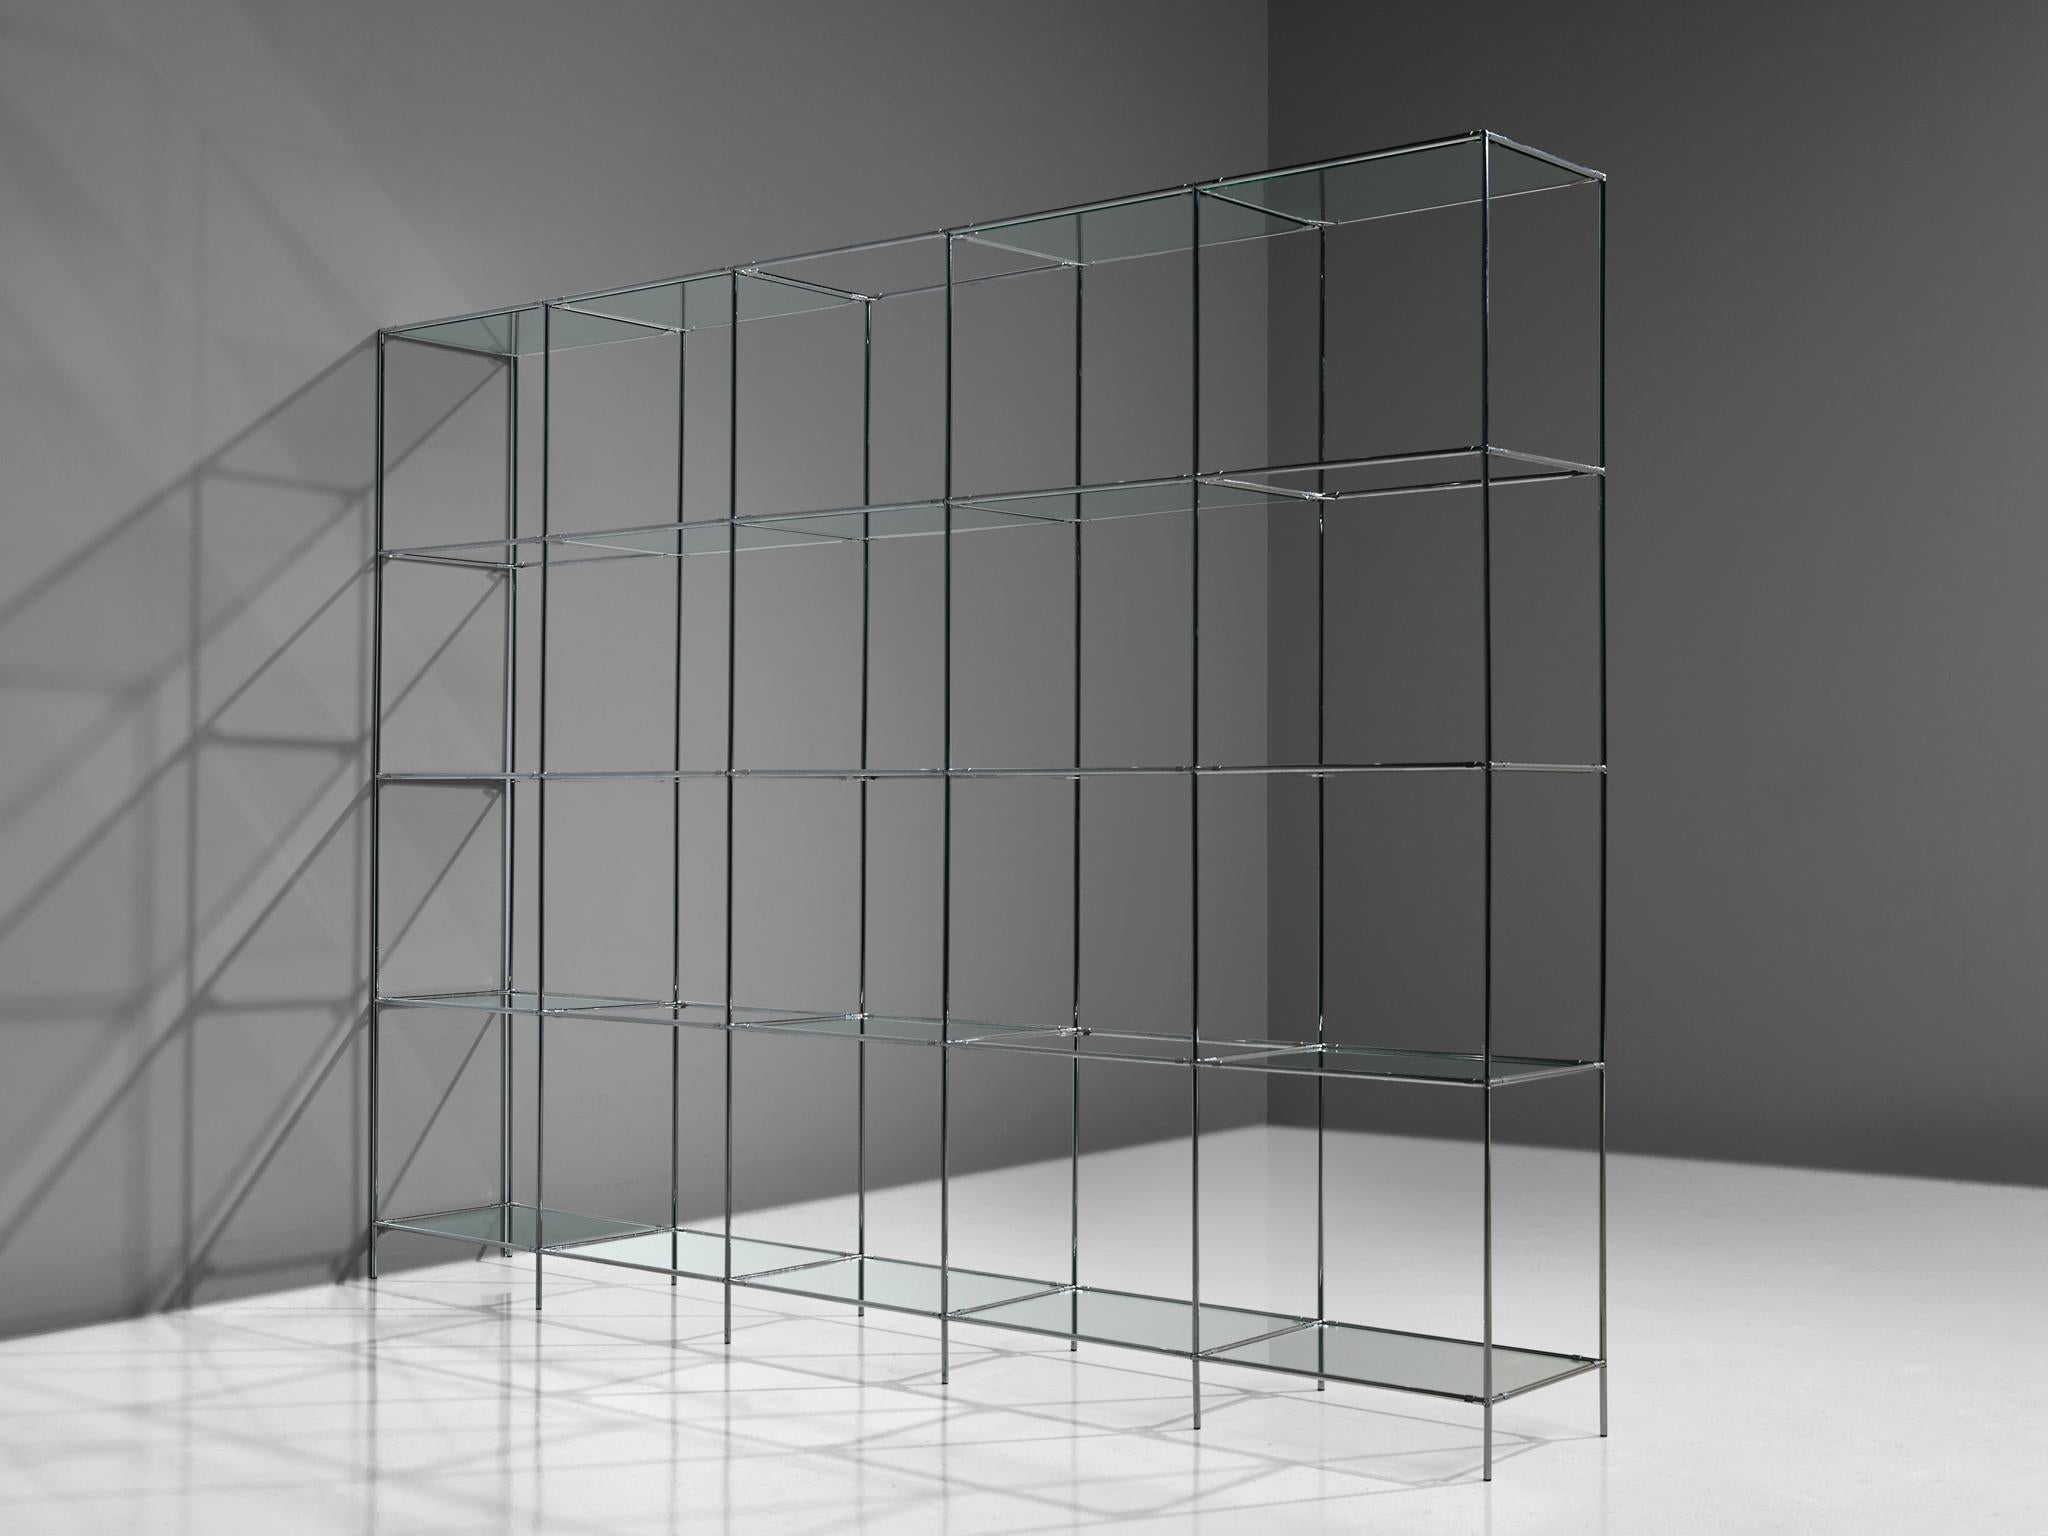 Poul Cadovius for Royal System, modular shelving unit or room divider, glass, chrome-plated steel, Denmark, 1960s.

This Minimalist shelving unit was designed by Poul Cadovius (1911-2011) and produced by Royal System, Denmark, circa 1960. This